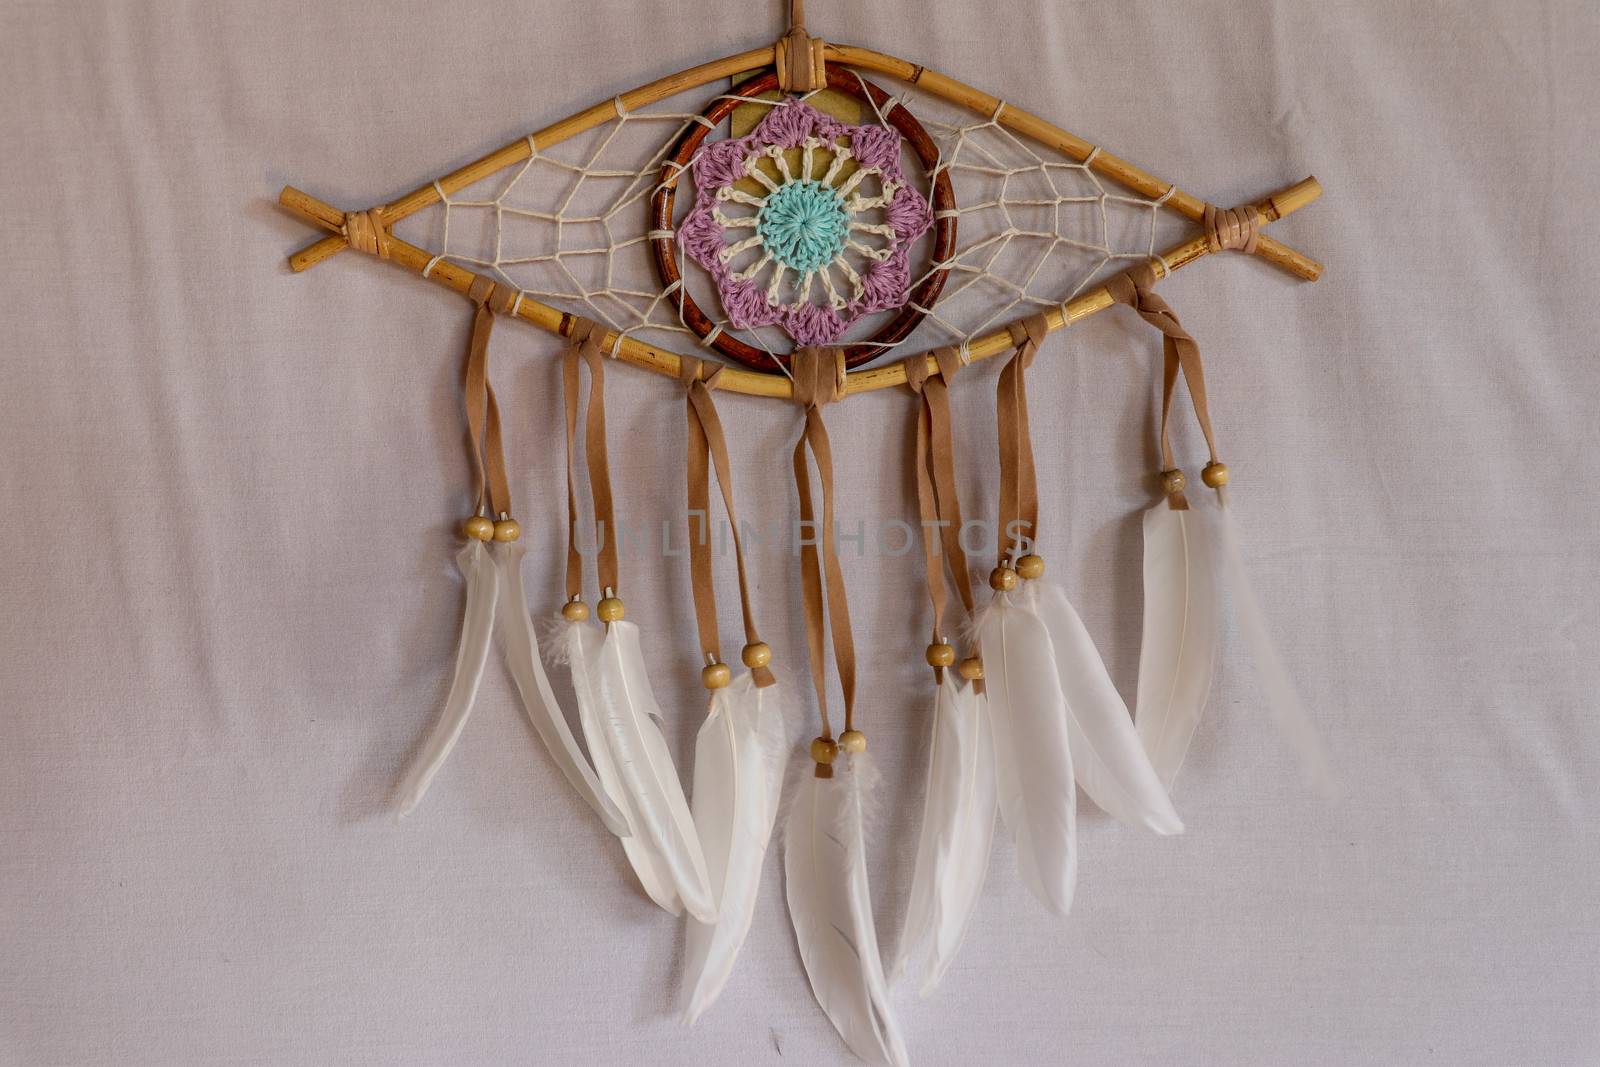 god eye of providence dreamcatcher with white feathers on a whit by Sanatana2008